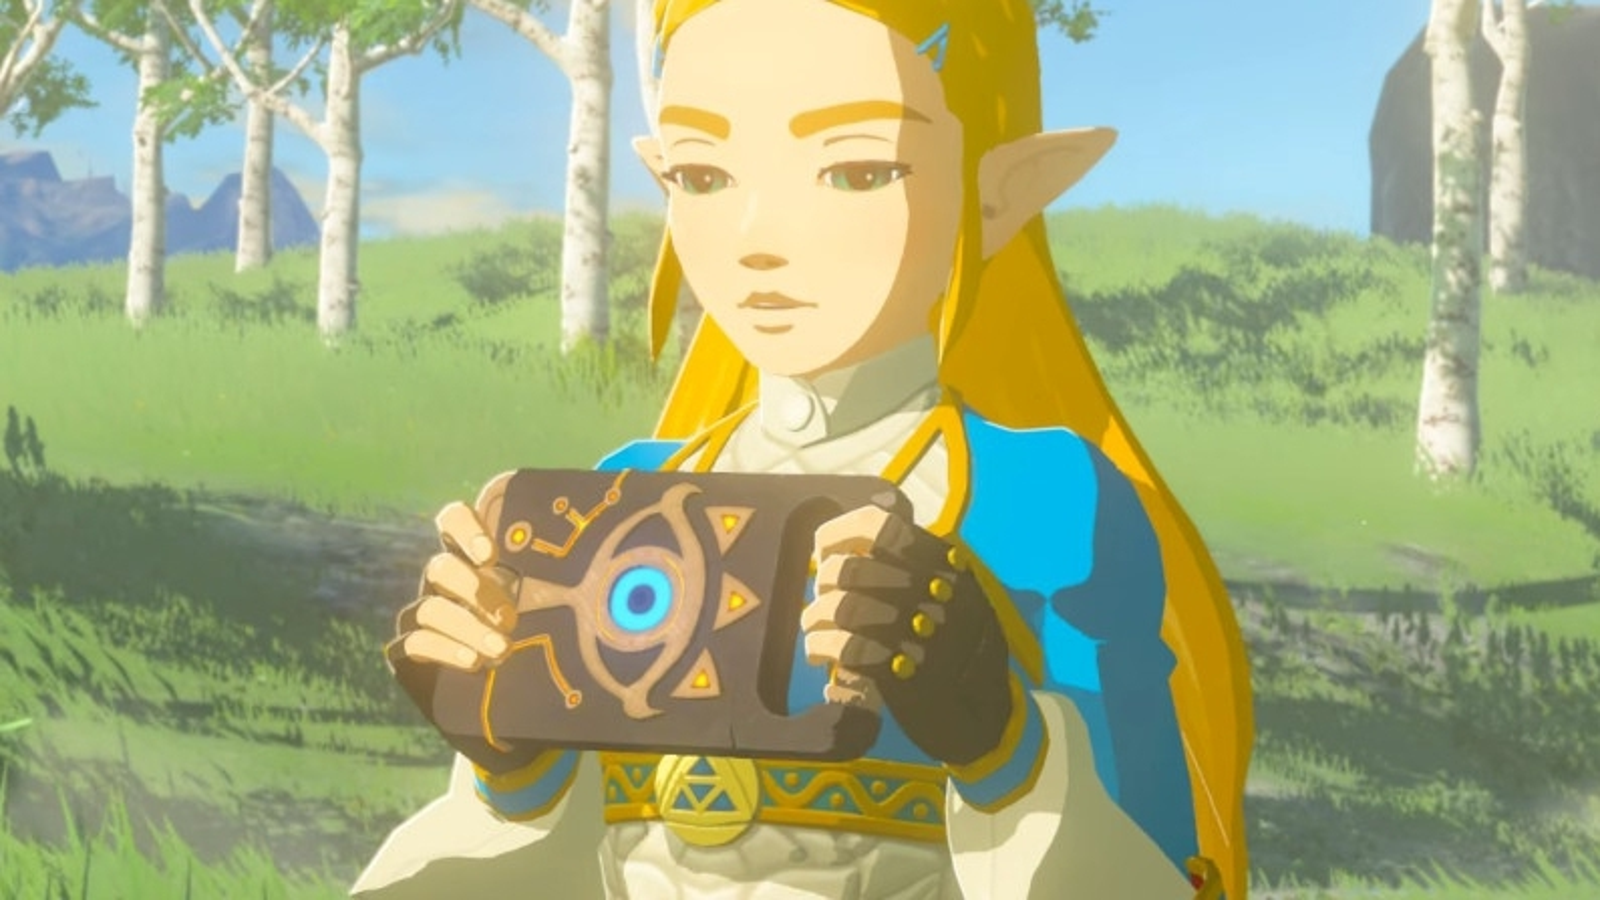 Breath Of The Wild' Has Been Confirmed To Be At The End Of The